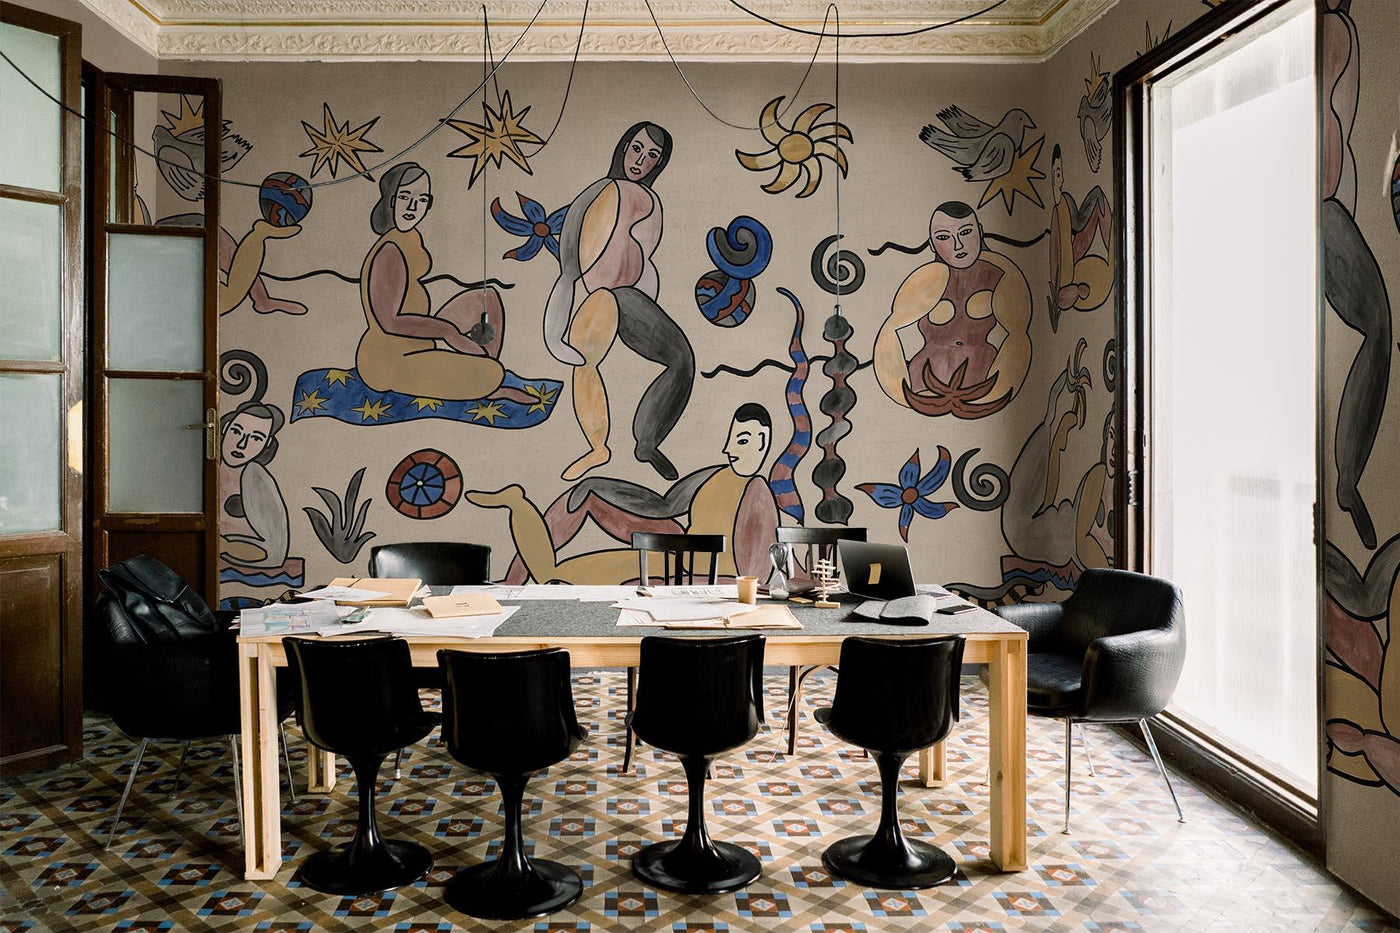 beige artistic wall mural on the walls of this dining room. ceramic floor with a mediterranean pattern on the floor. Wooden table and black plastic chairs